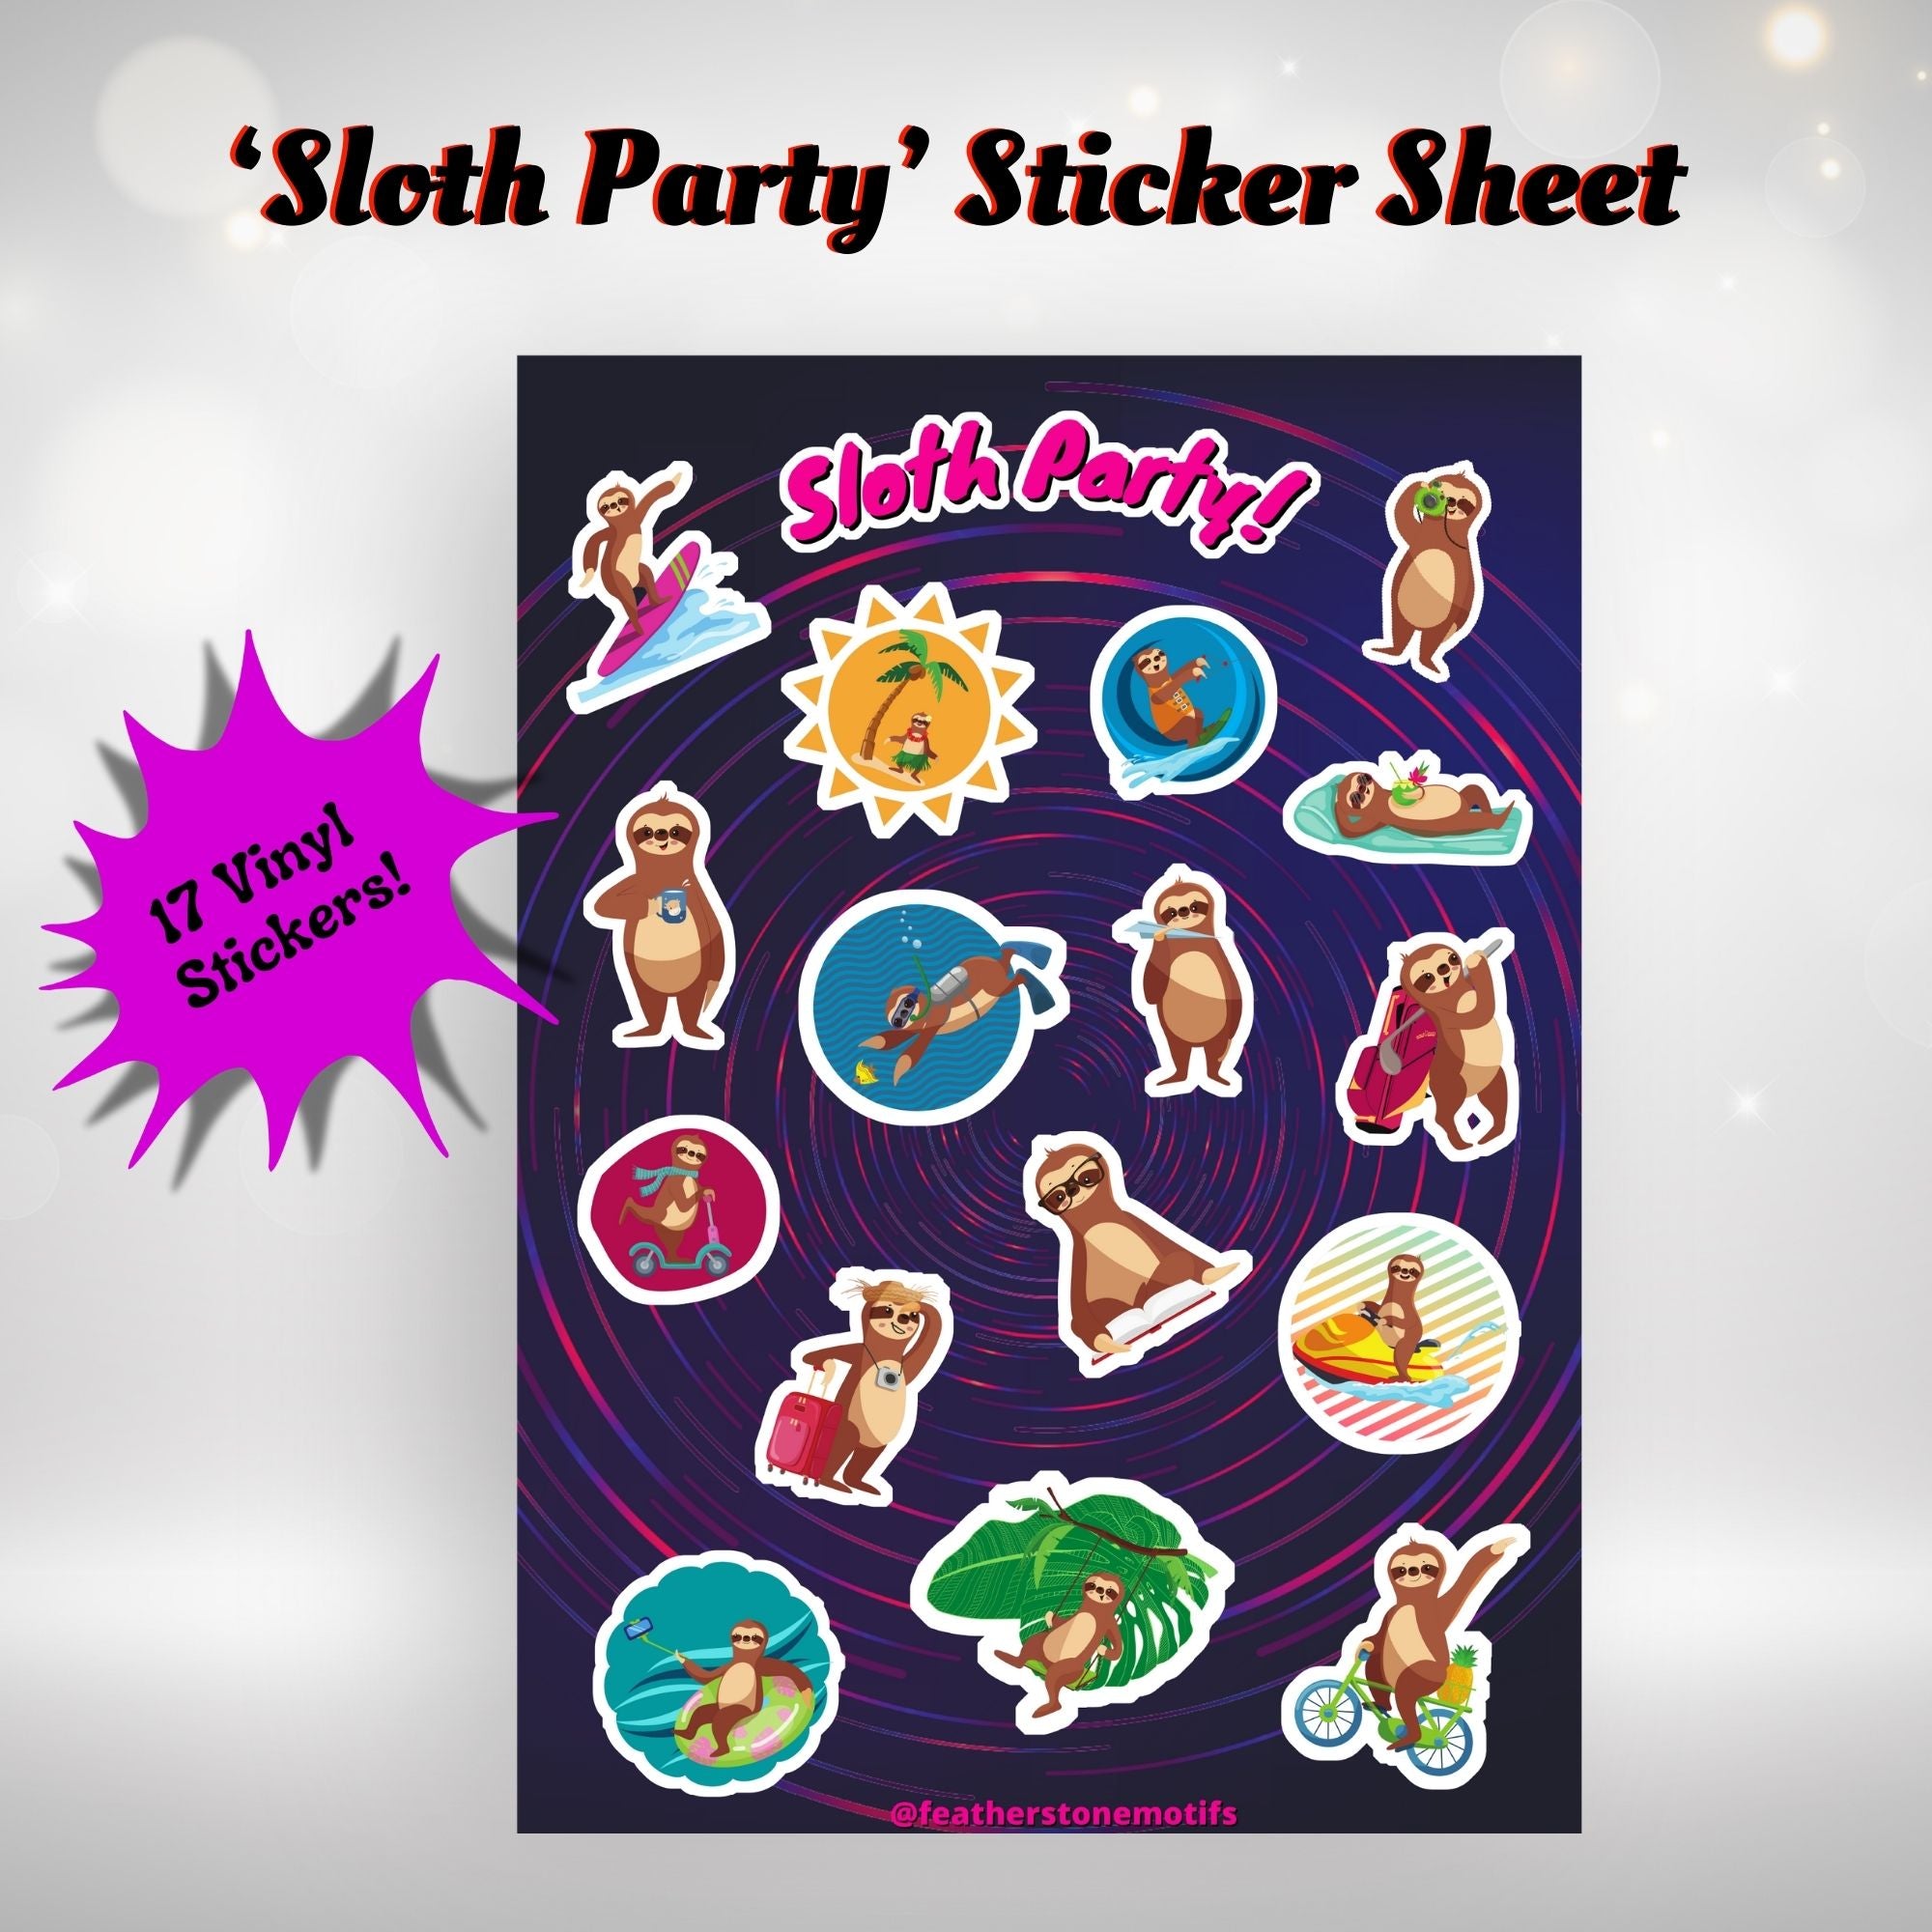 This image shows the Sloth Party! sticker sheet with 17 vinyl stickers that is included in the Sloth themed Camp Postcard Kit.